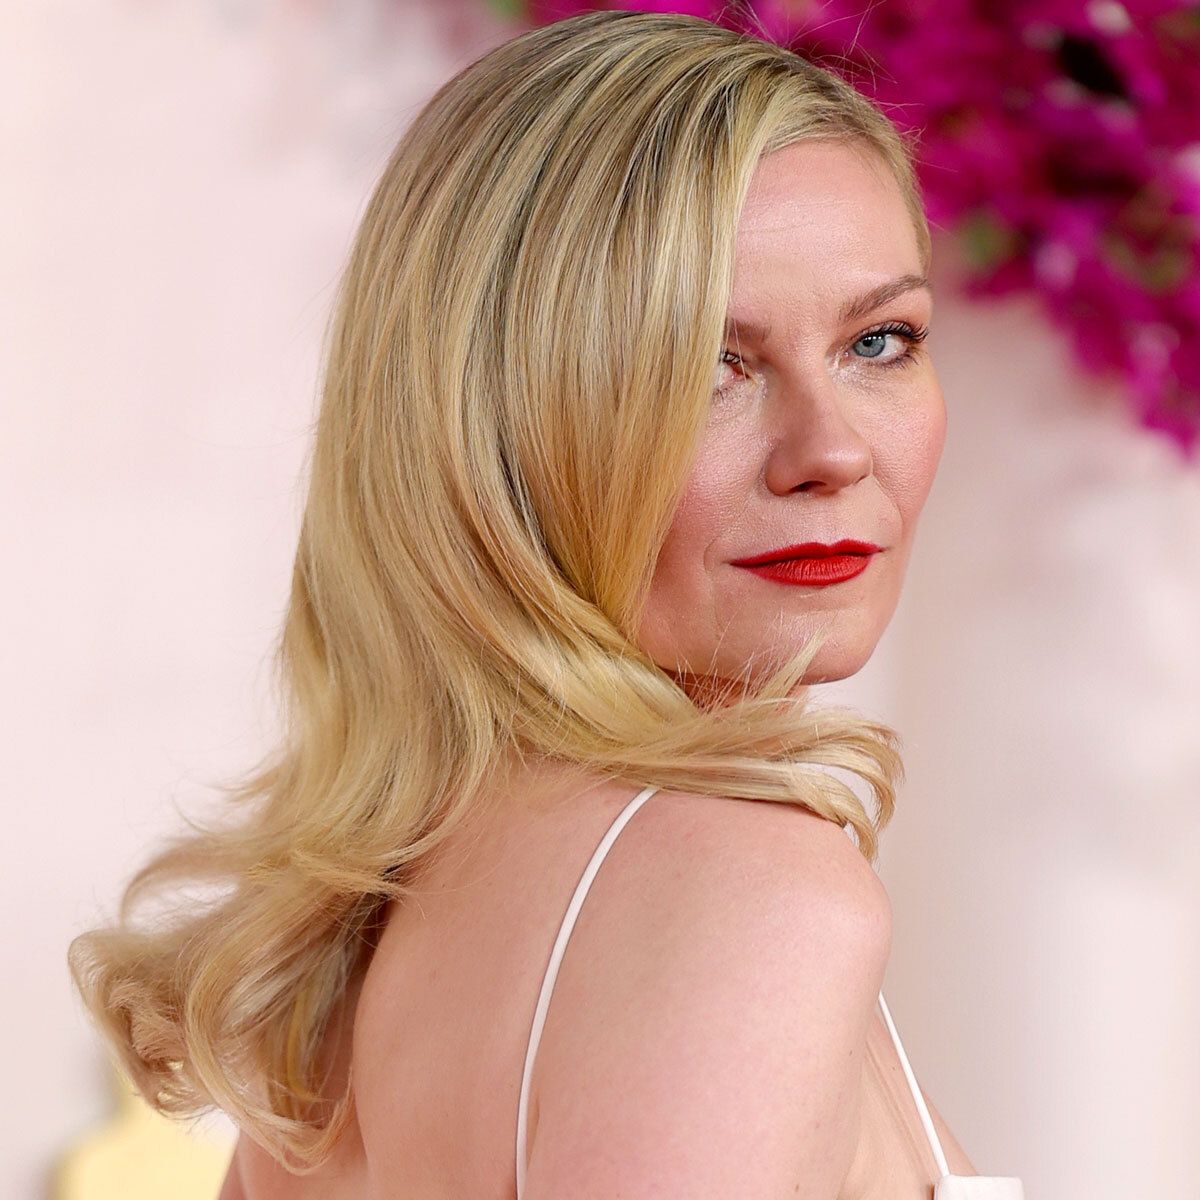 Kirsten Dunst Just Wore a Wedding Dress–Worthy Gown on the Oscars Red Carpet